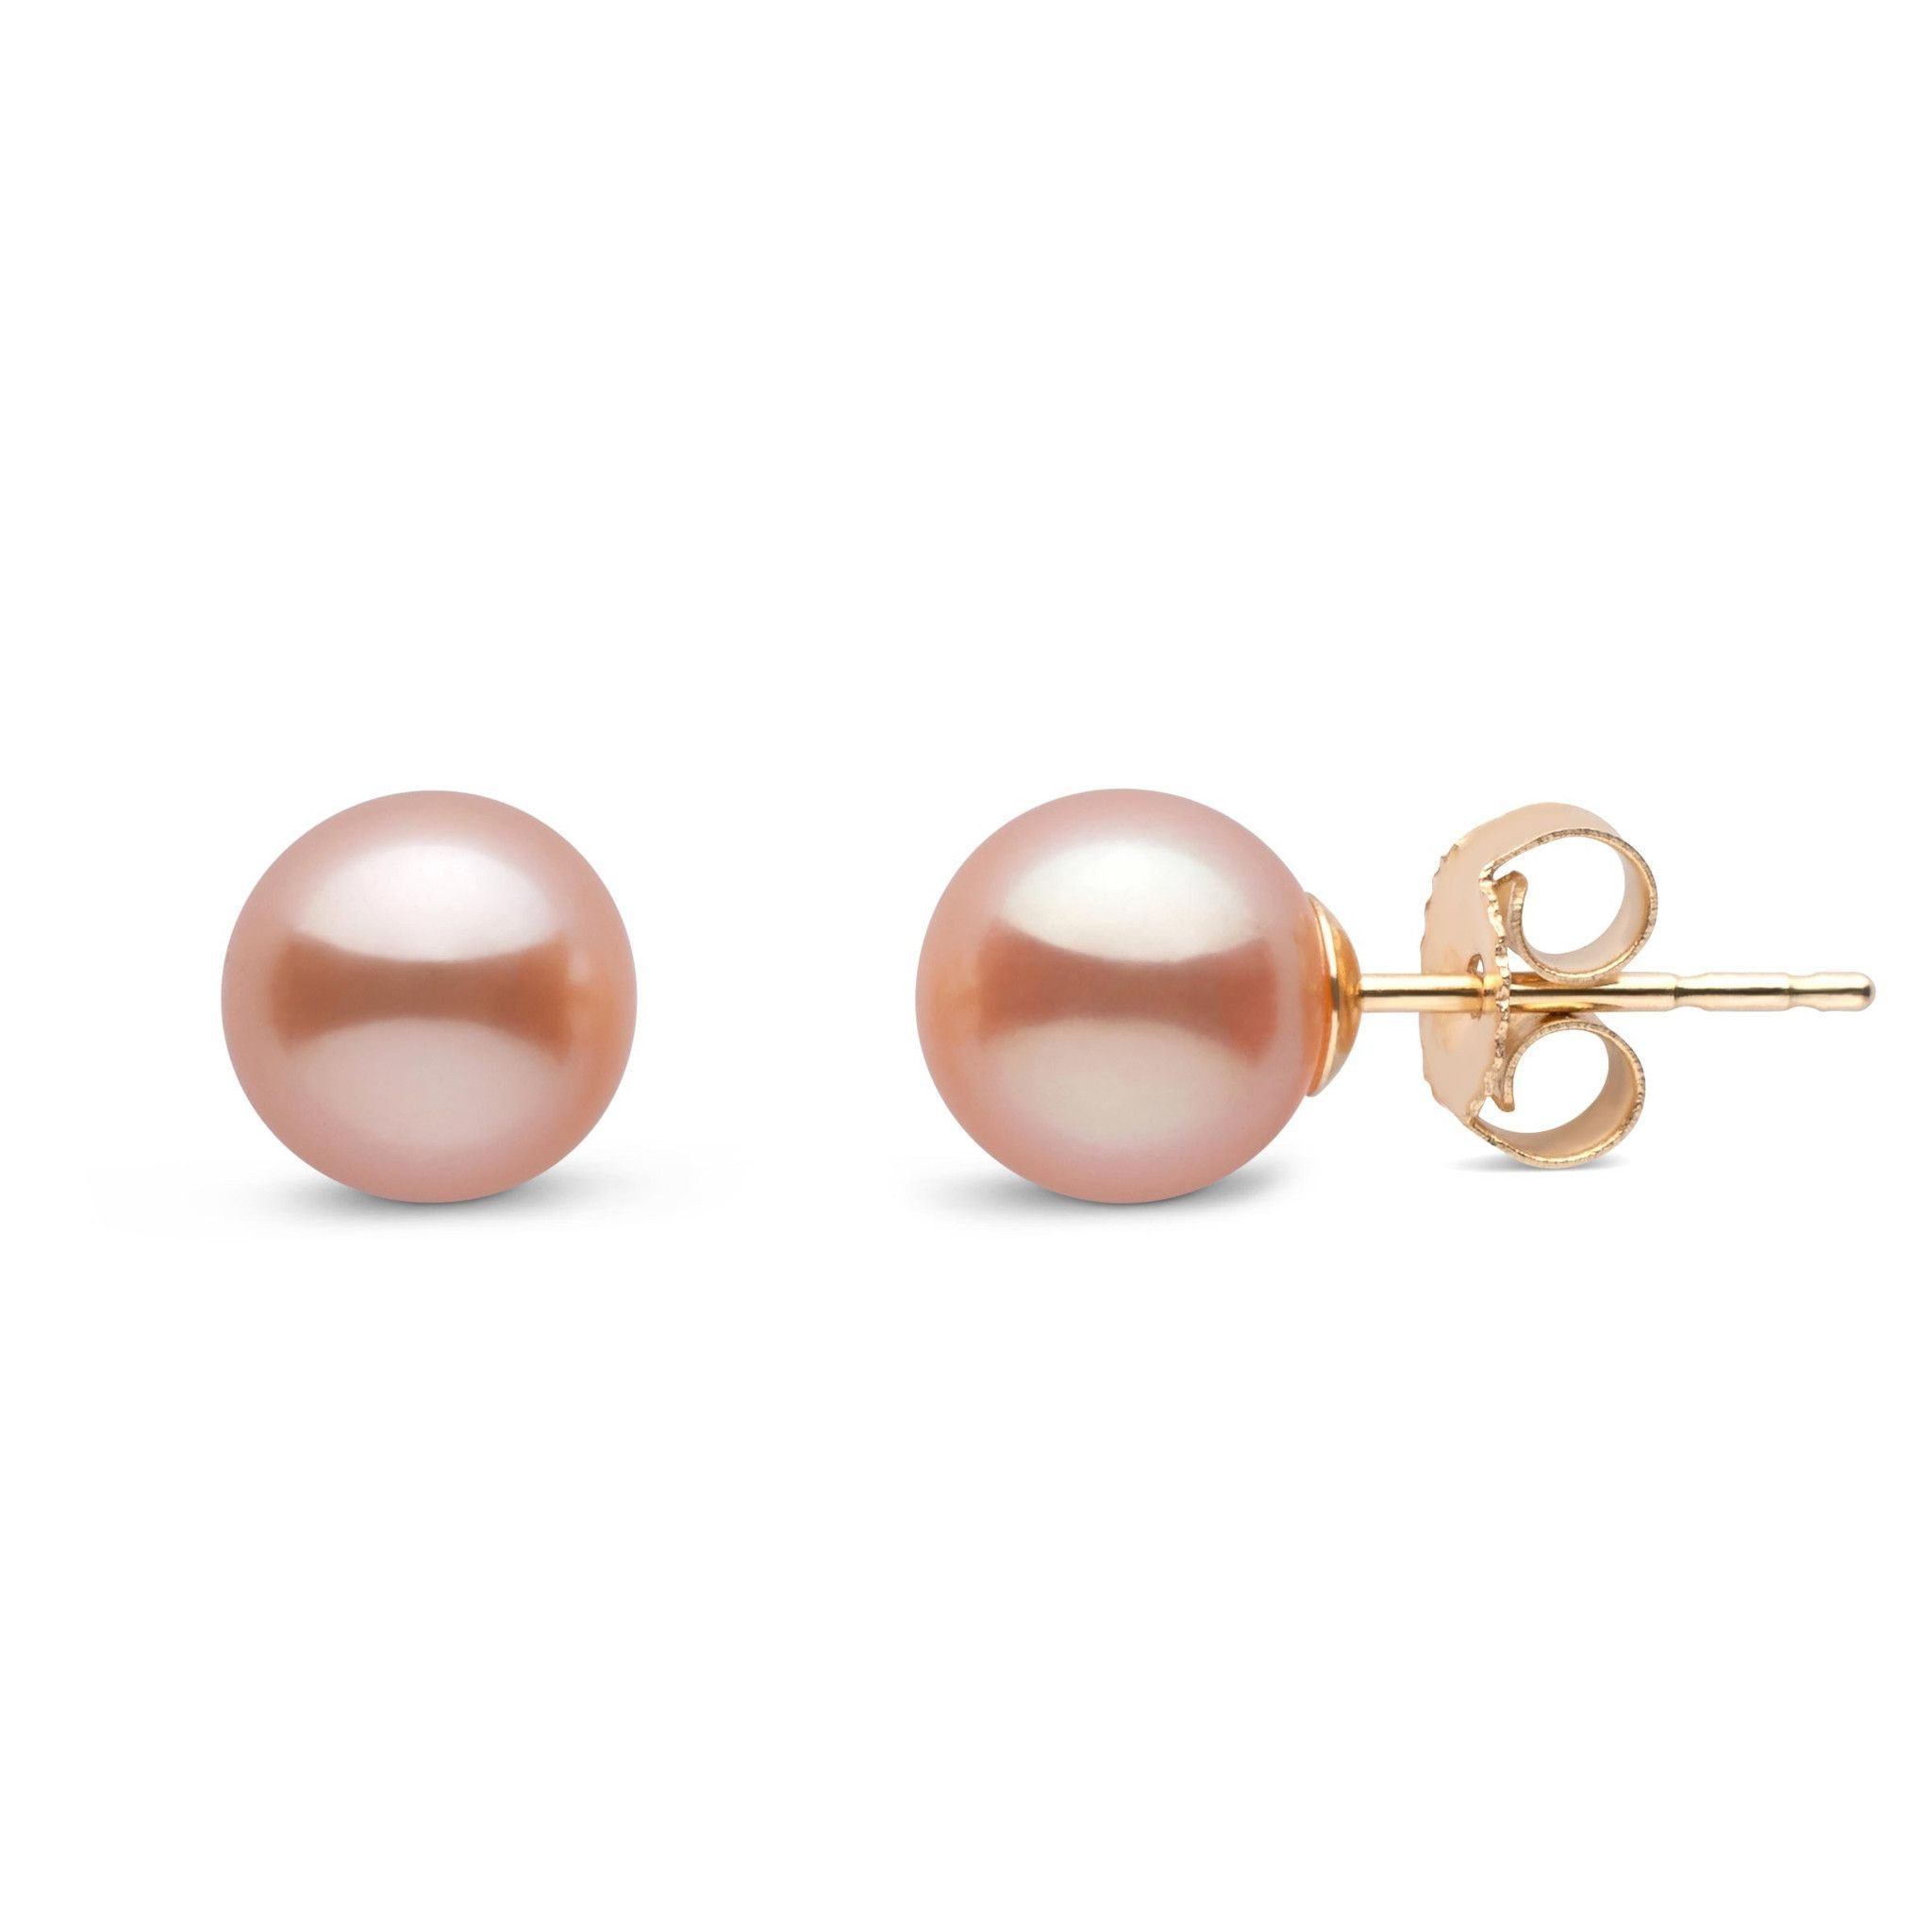 6.5-7.0 mm AAA Pink to Peach Freshwater Pearl Stud Earrings yellow gold